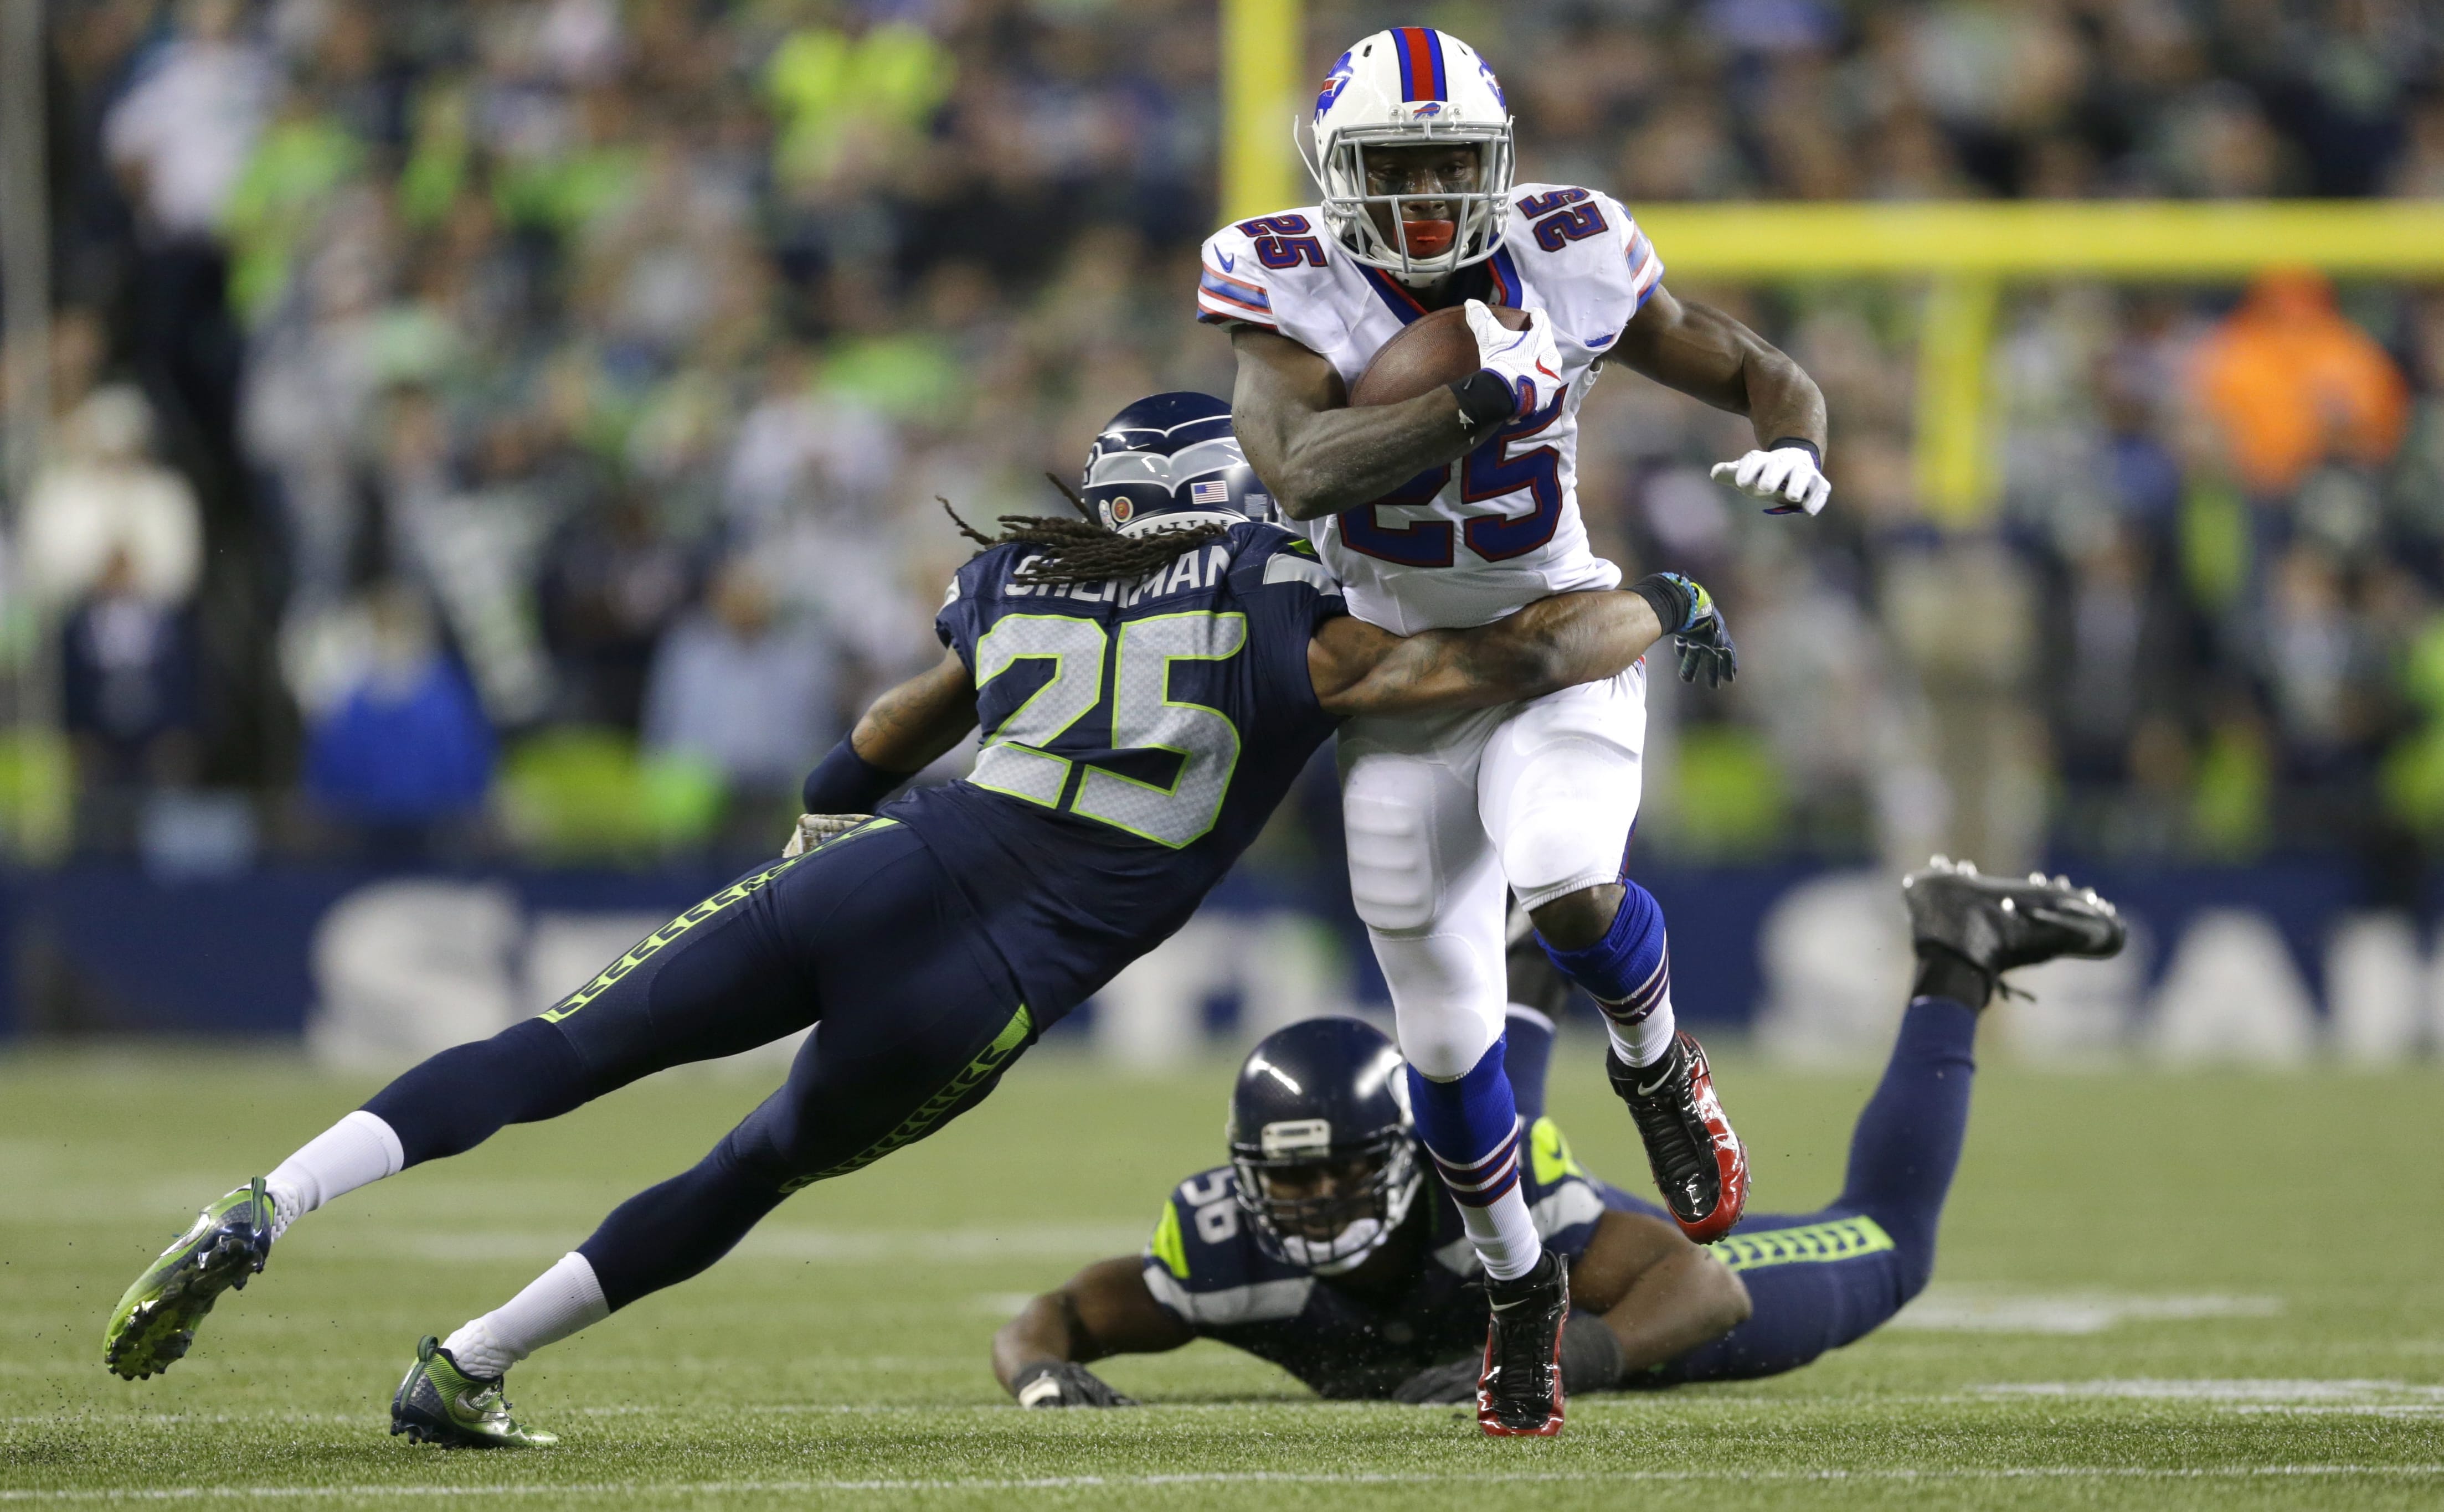 Seattle Seahawks cornerback Richard Sherman, left, tackles Buffalo Bills running back LeSean McCoy after McCoy got past Seahawks' defensive end Cliff Avril, bottom, in the second half of an NFL football game, Monday, Nov. 7, 2016, in Seattle.